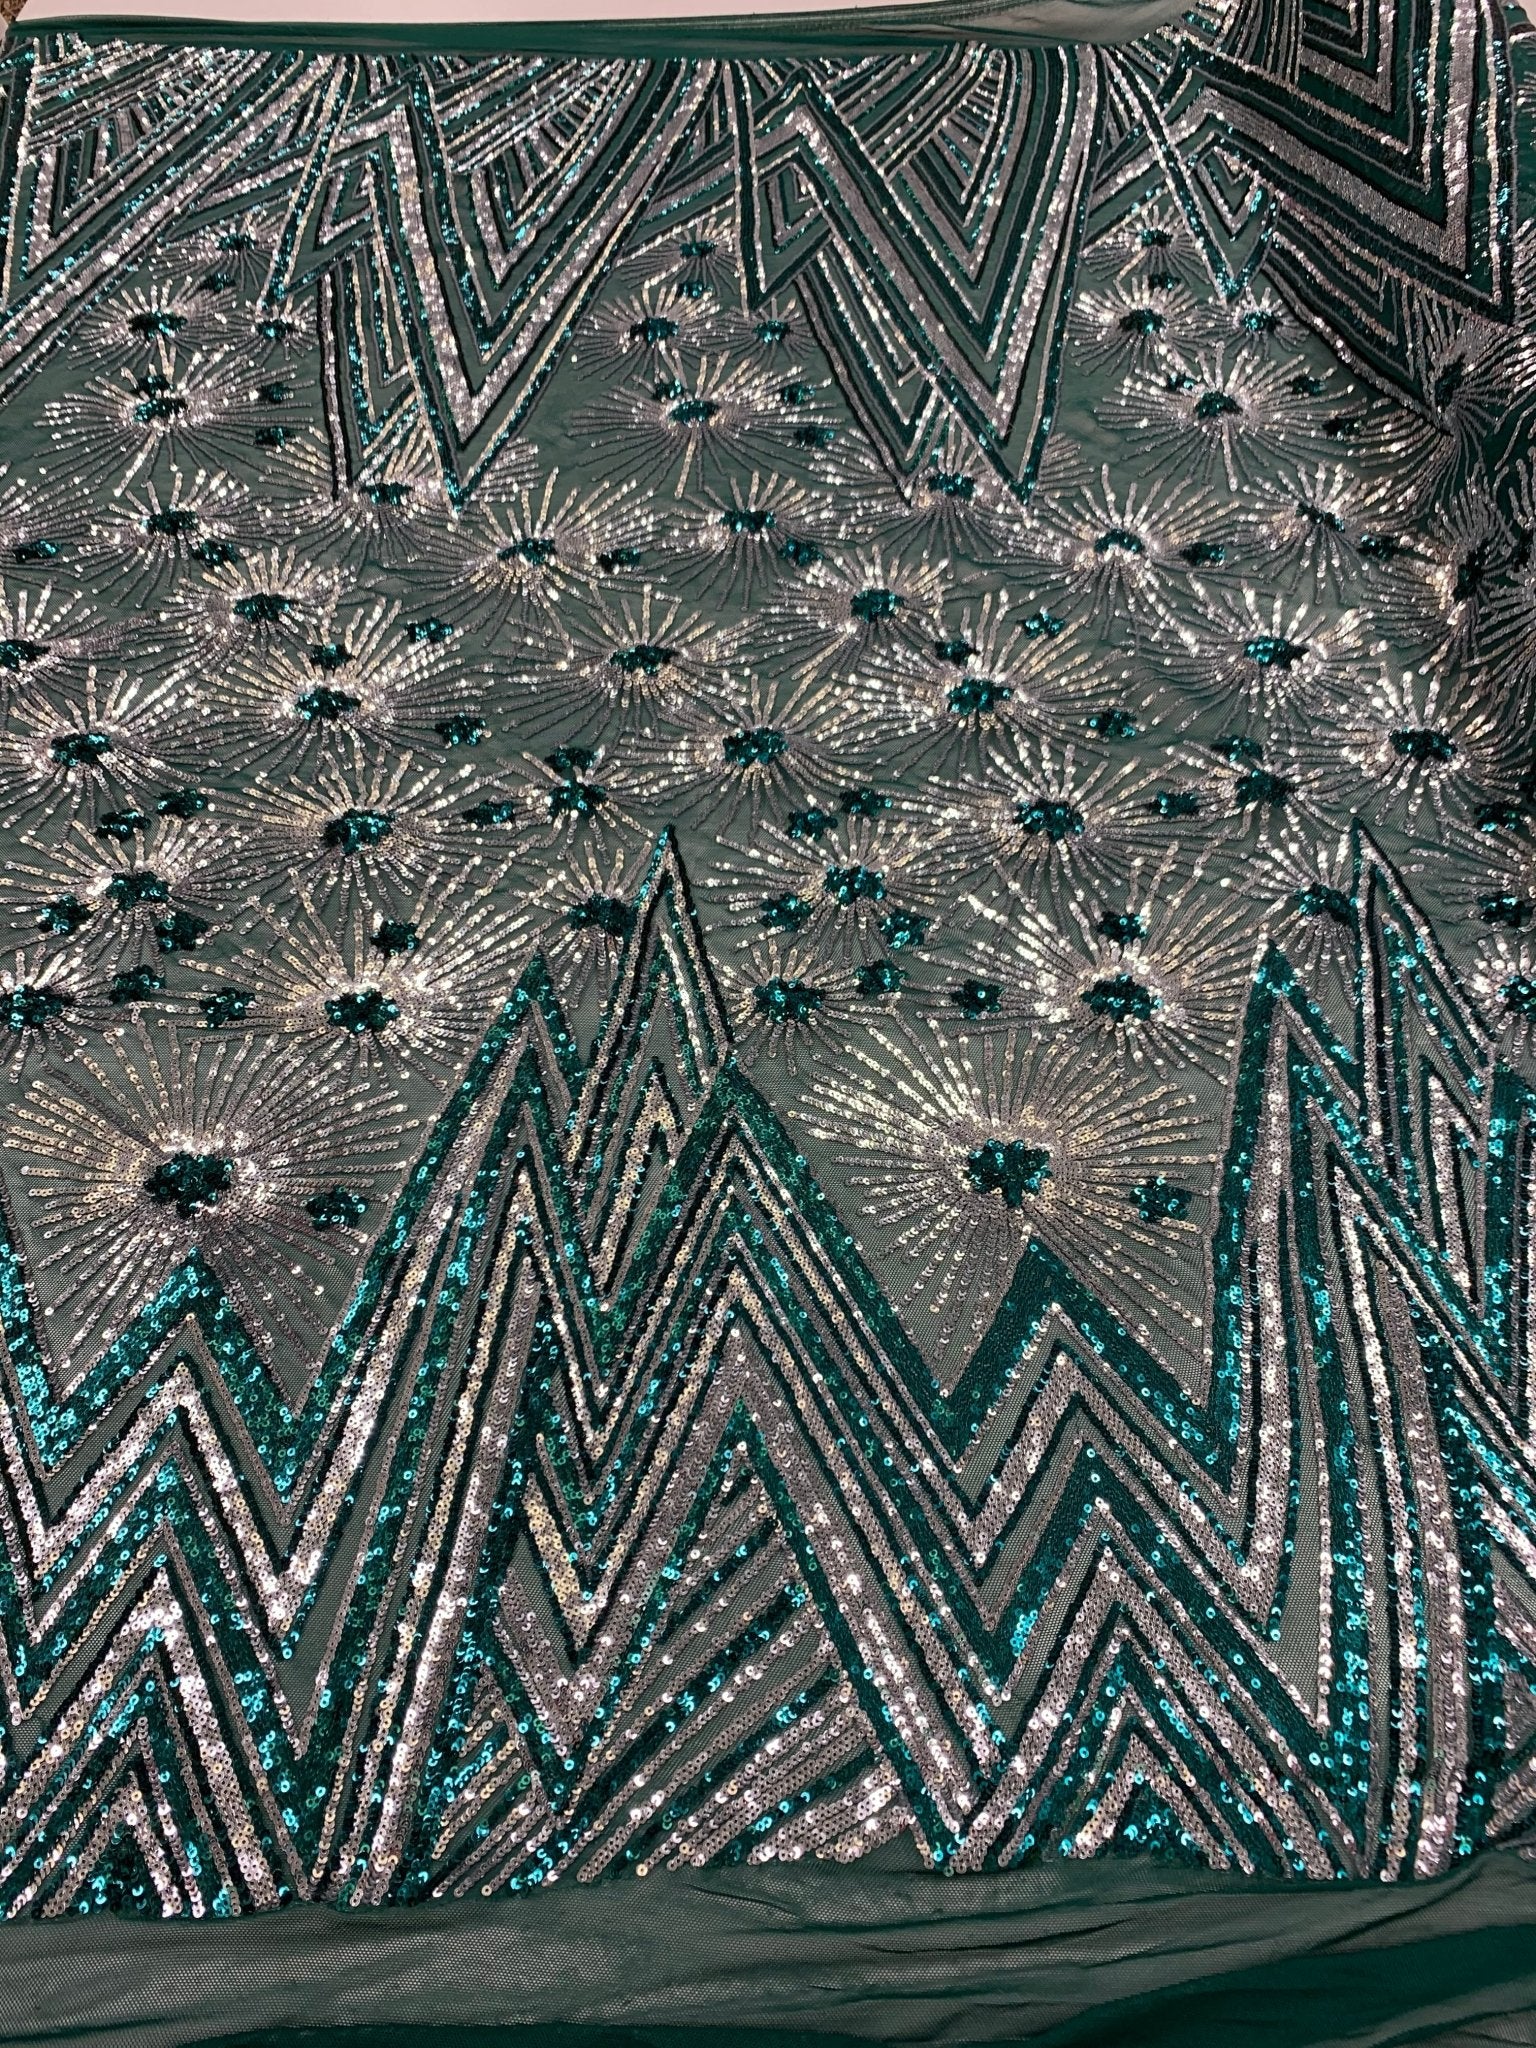 4 Way Stretch Iridescent Geometric Sequin Embroidered Mesh Lace FabricICEFABRICICE FABRICSHunter Green IridescentBy The Yard (58" Wide)4 Way Stretch Iridescent Geometric Sequin Embroidered Mesh Lace Fabric ICEFABRIC |Hunter Green Iridescent